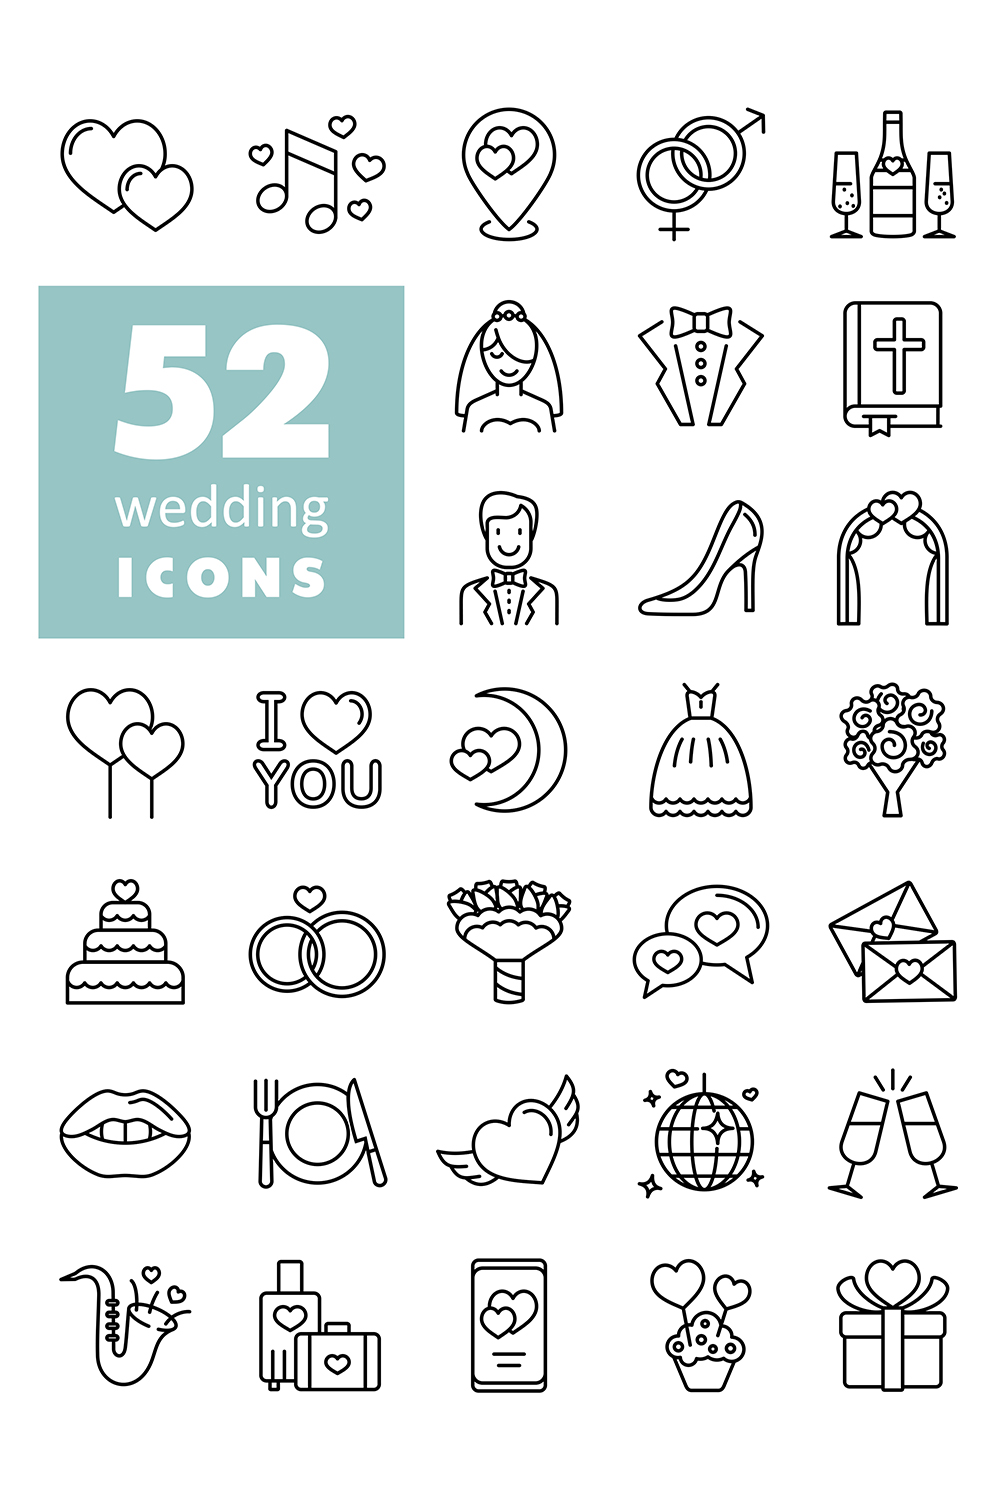 52 Wedding, marriage, bridal icon pinterest preview image.